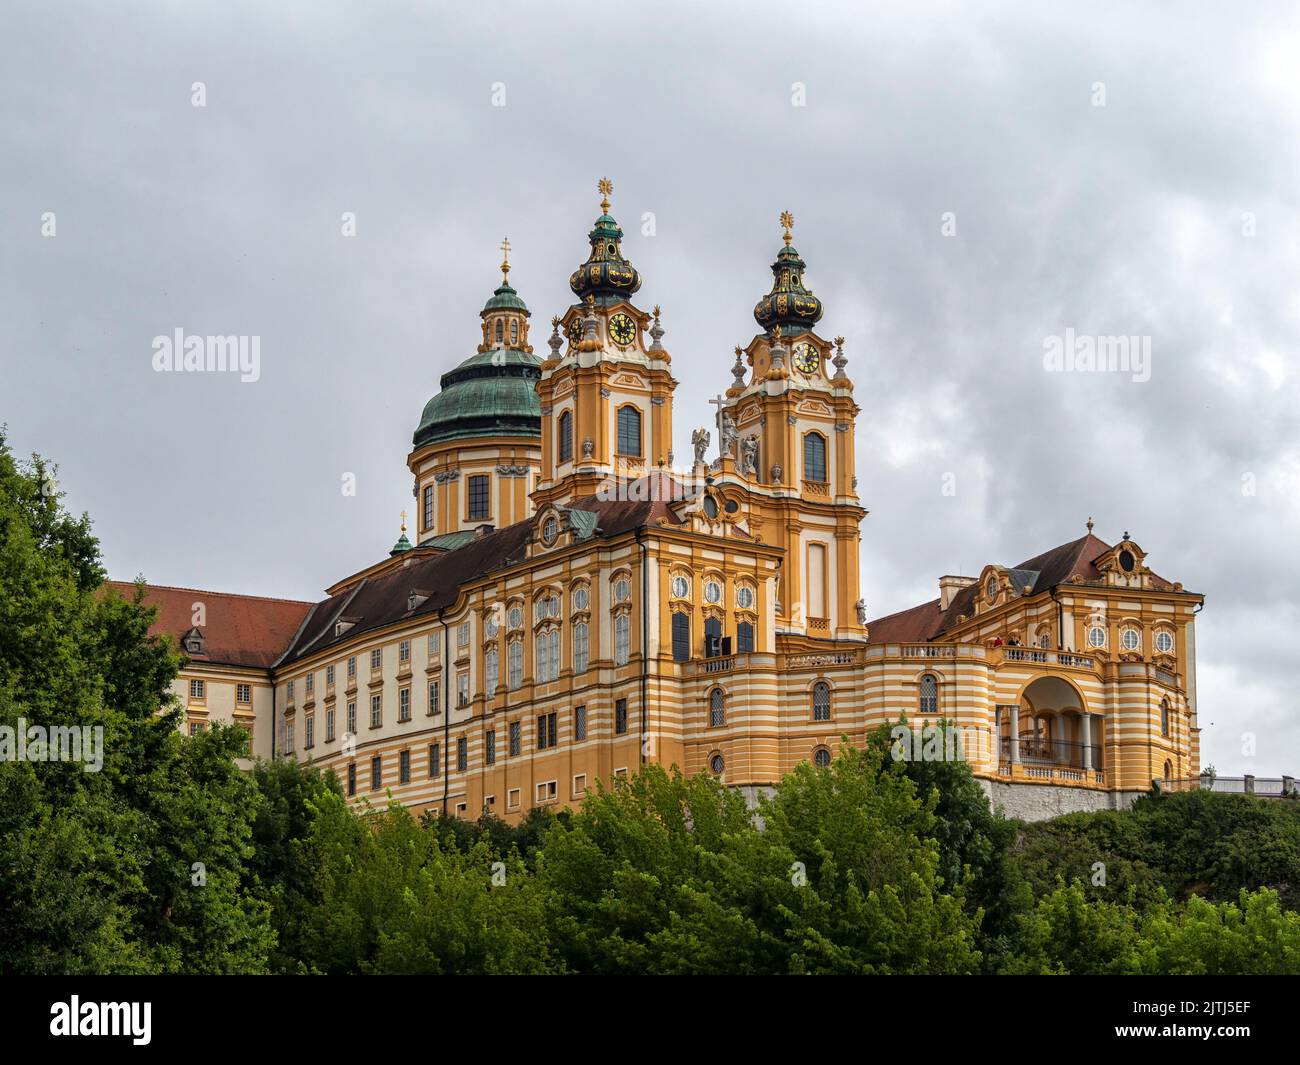 MELK, AUSTRIA - JULY 13, 2019:  Exterior view of Melk Abbey, a Benedictine abbey that sits above the town Stock Photo